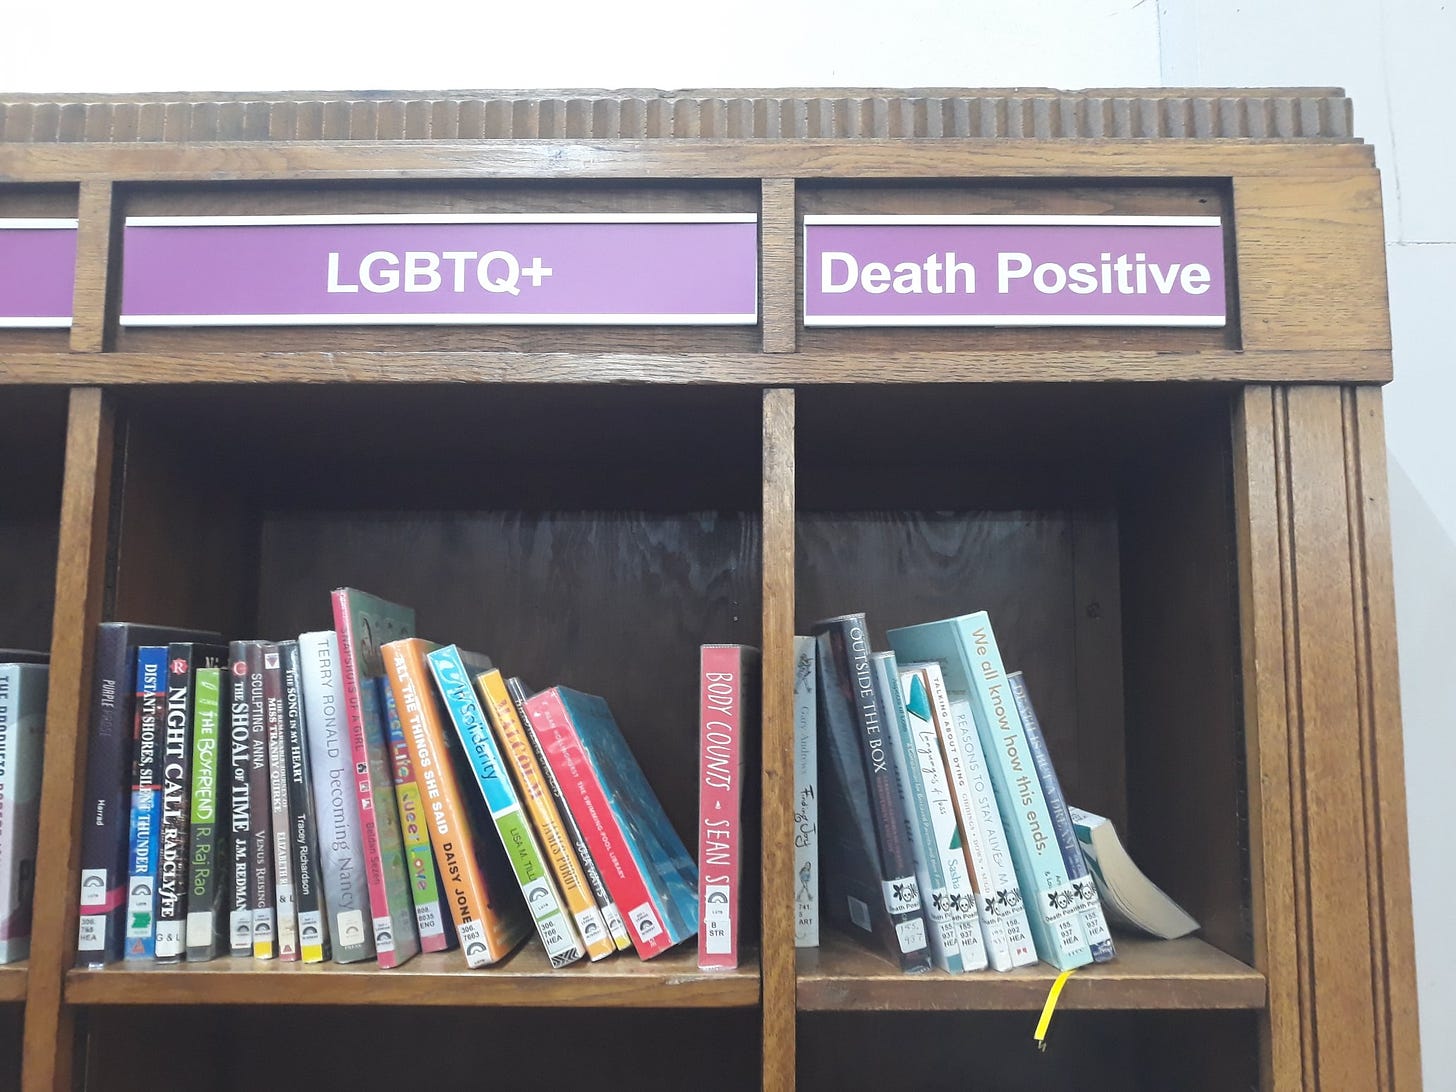 library bookshelf with LGBTQ+ and death positive labels